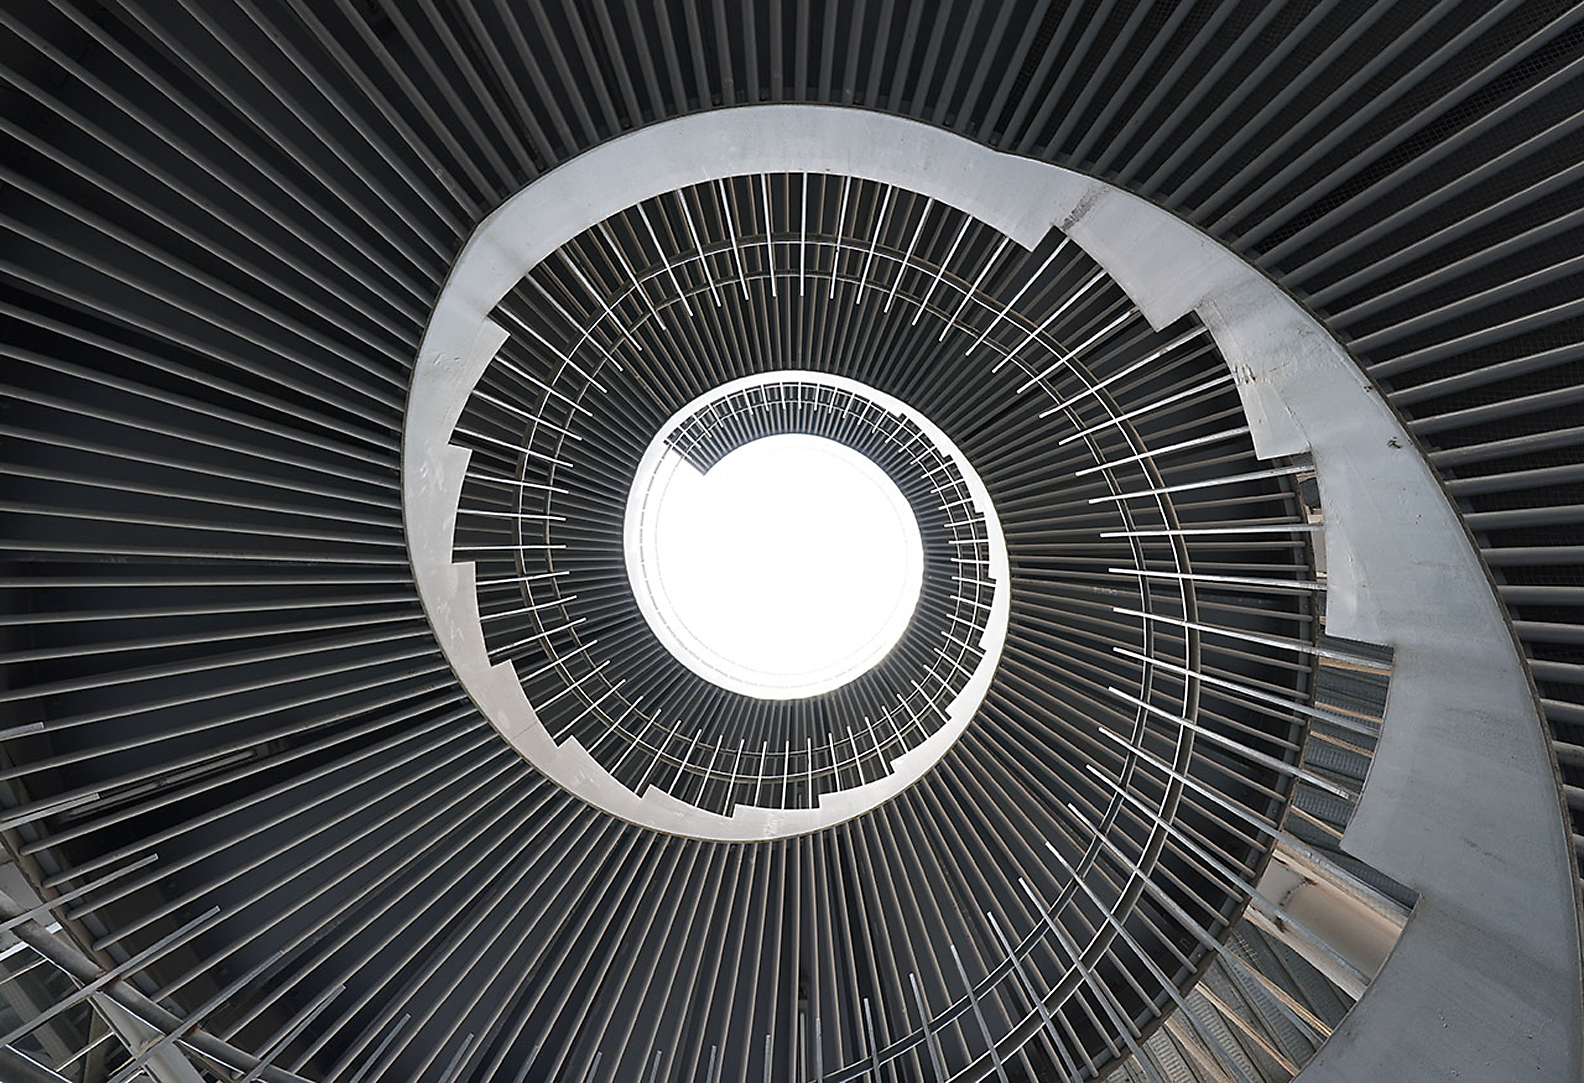 Image of spiral staircase